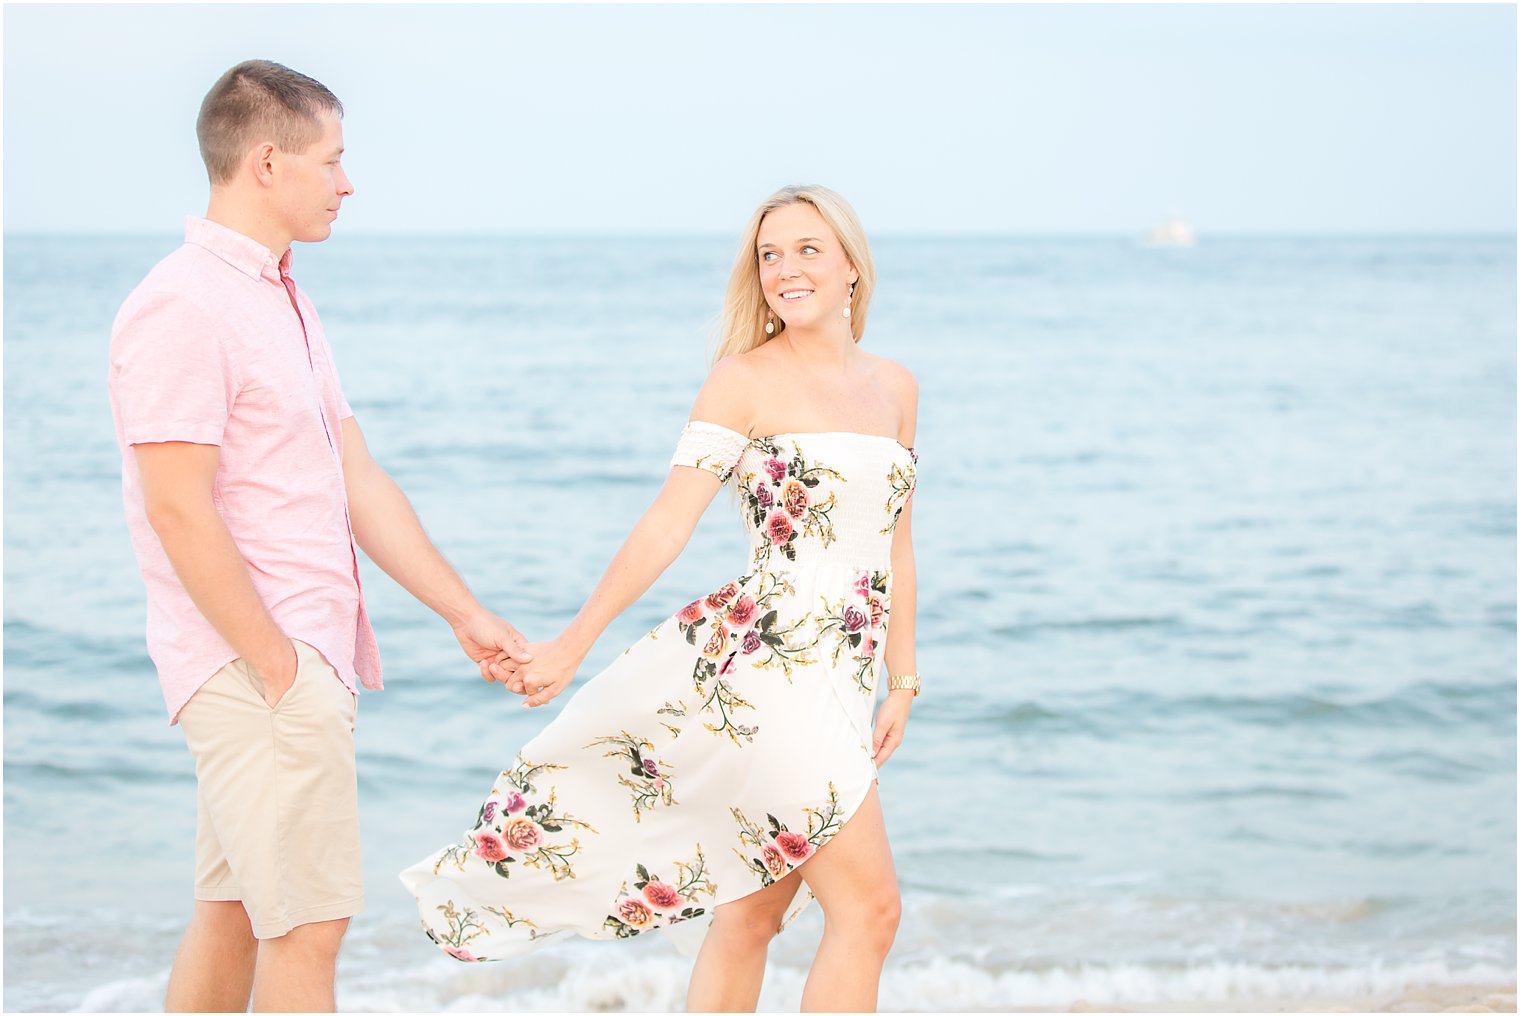 Engagement photos at the Jersey Shore